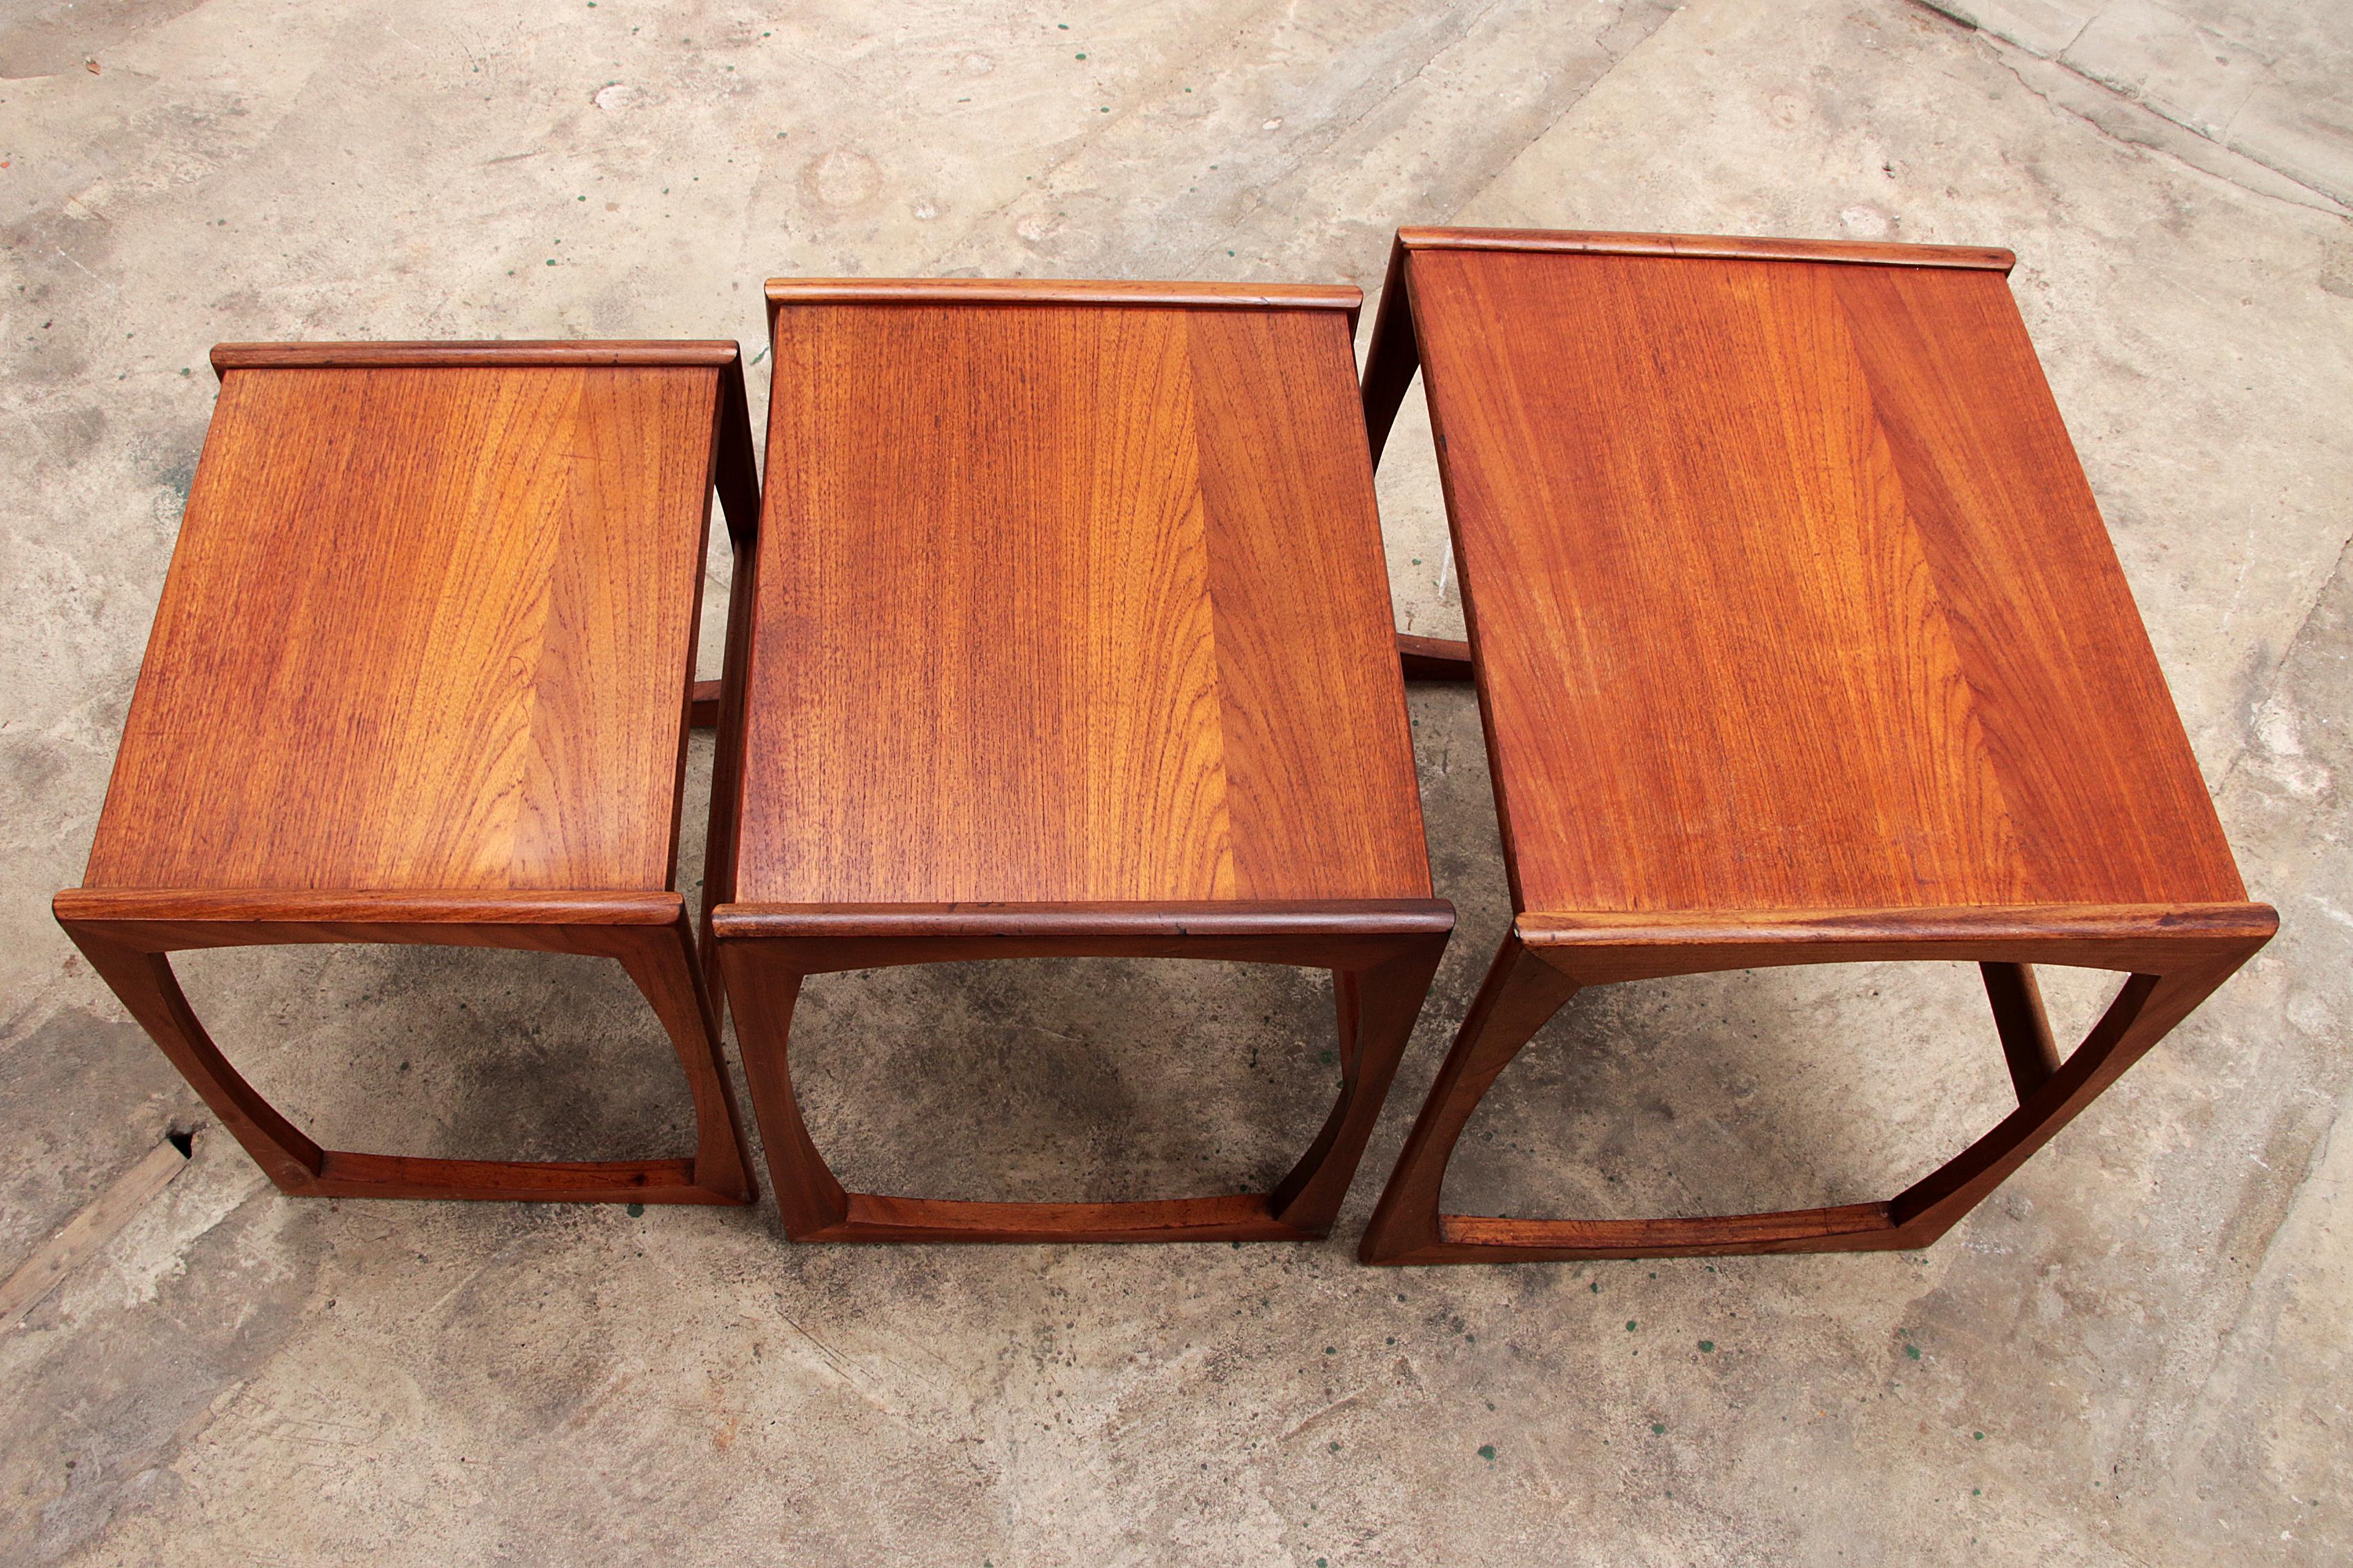 Side tables G-Plan Vintage Nesting Tables, 1960s England. 4